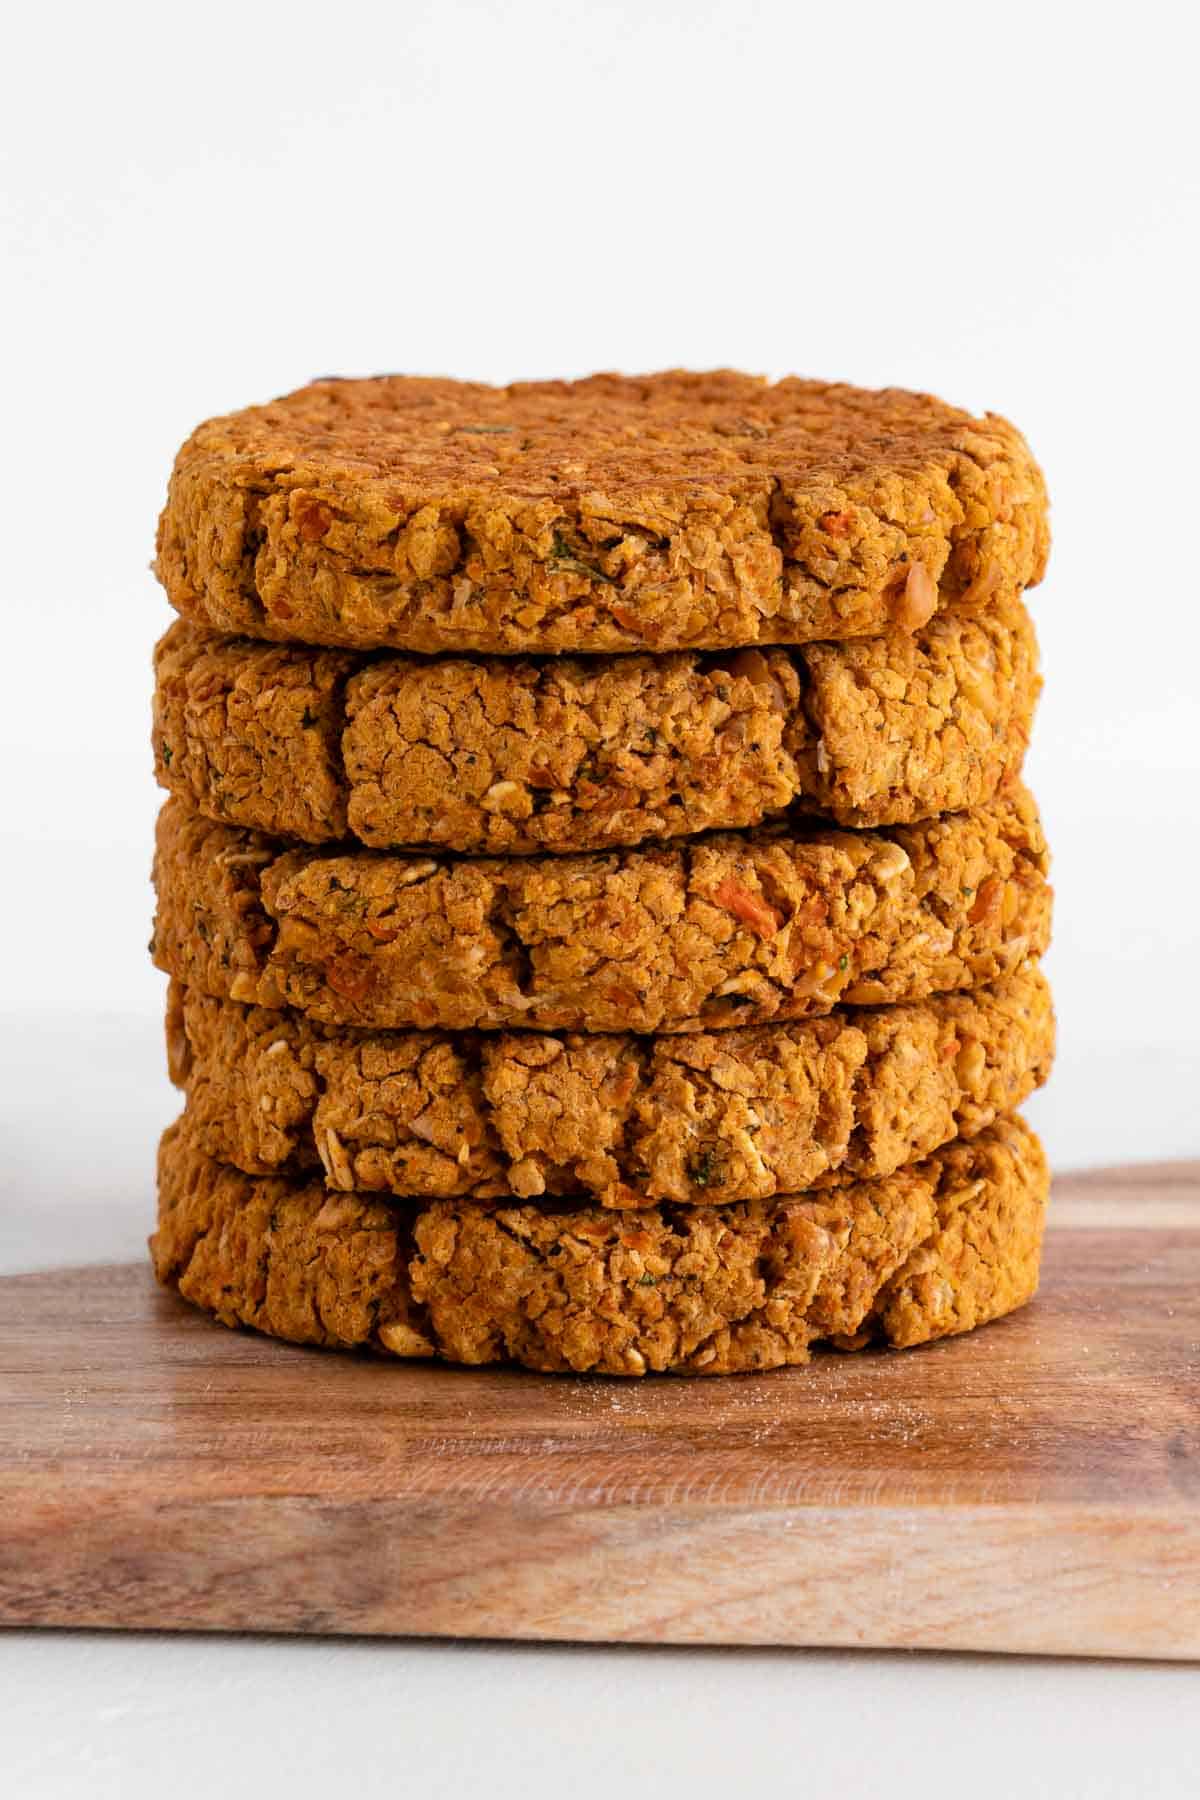 a stack of five chickpea burger patties on a wooden cutting board